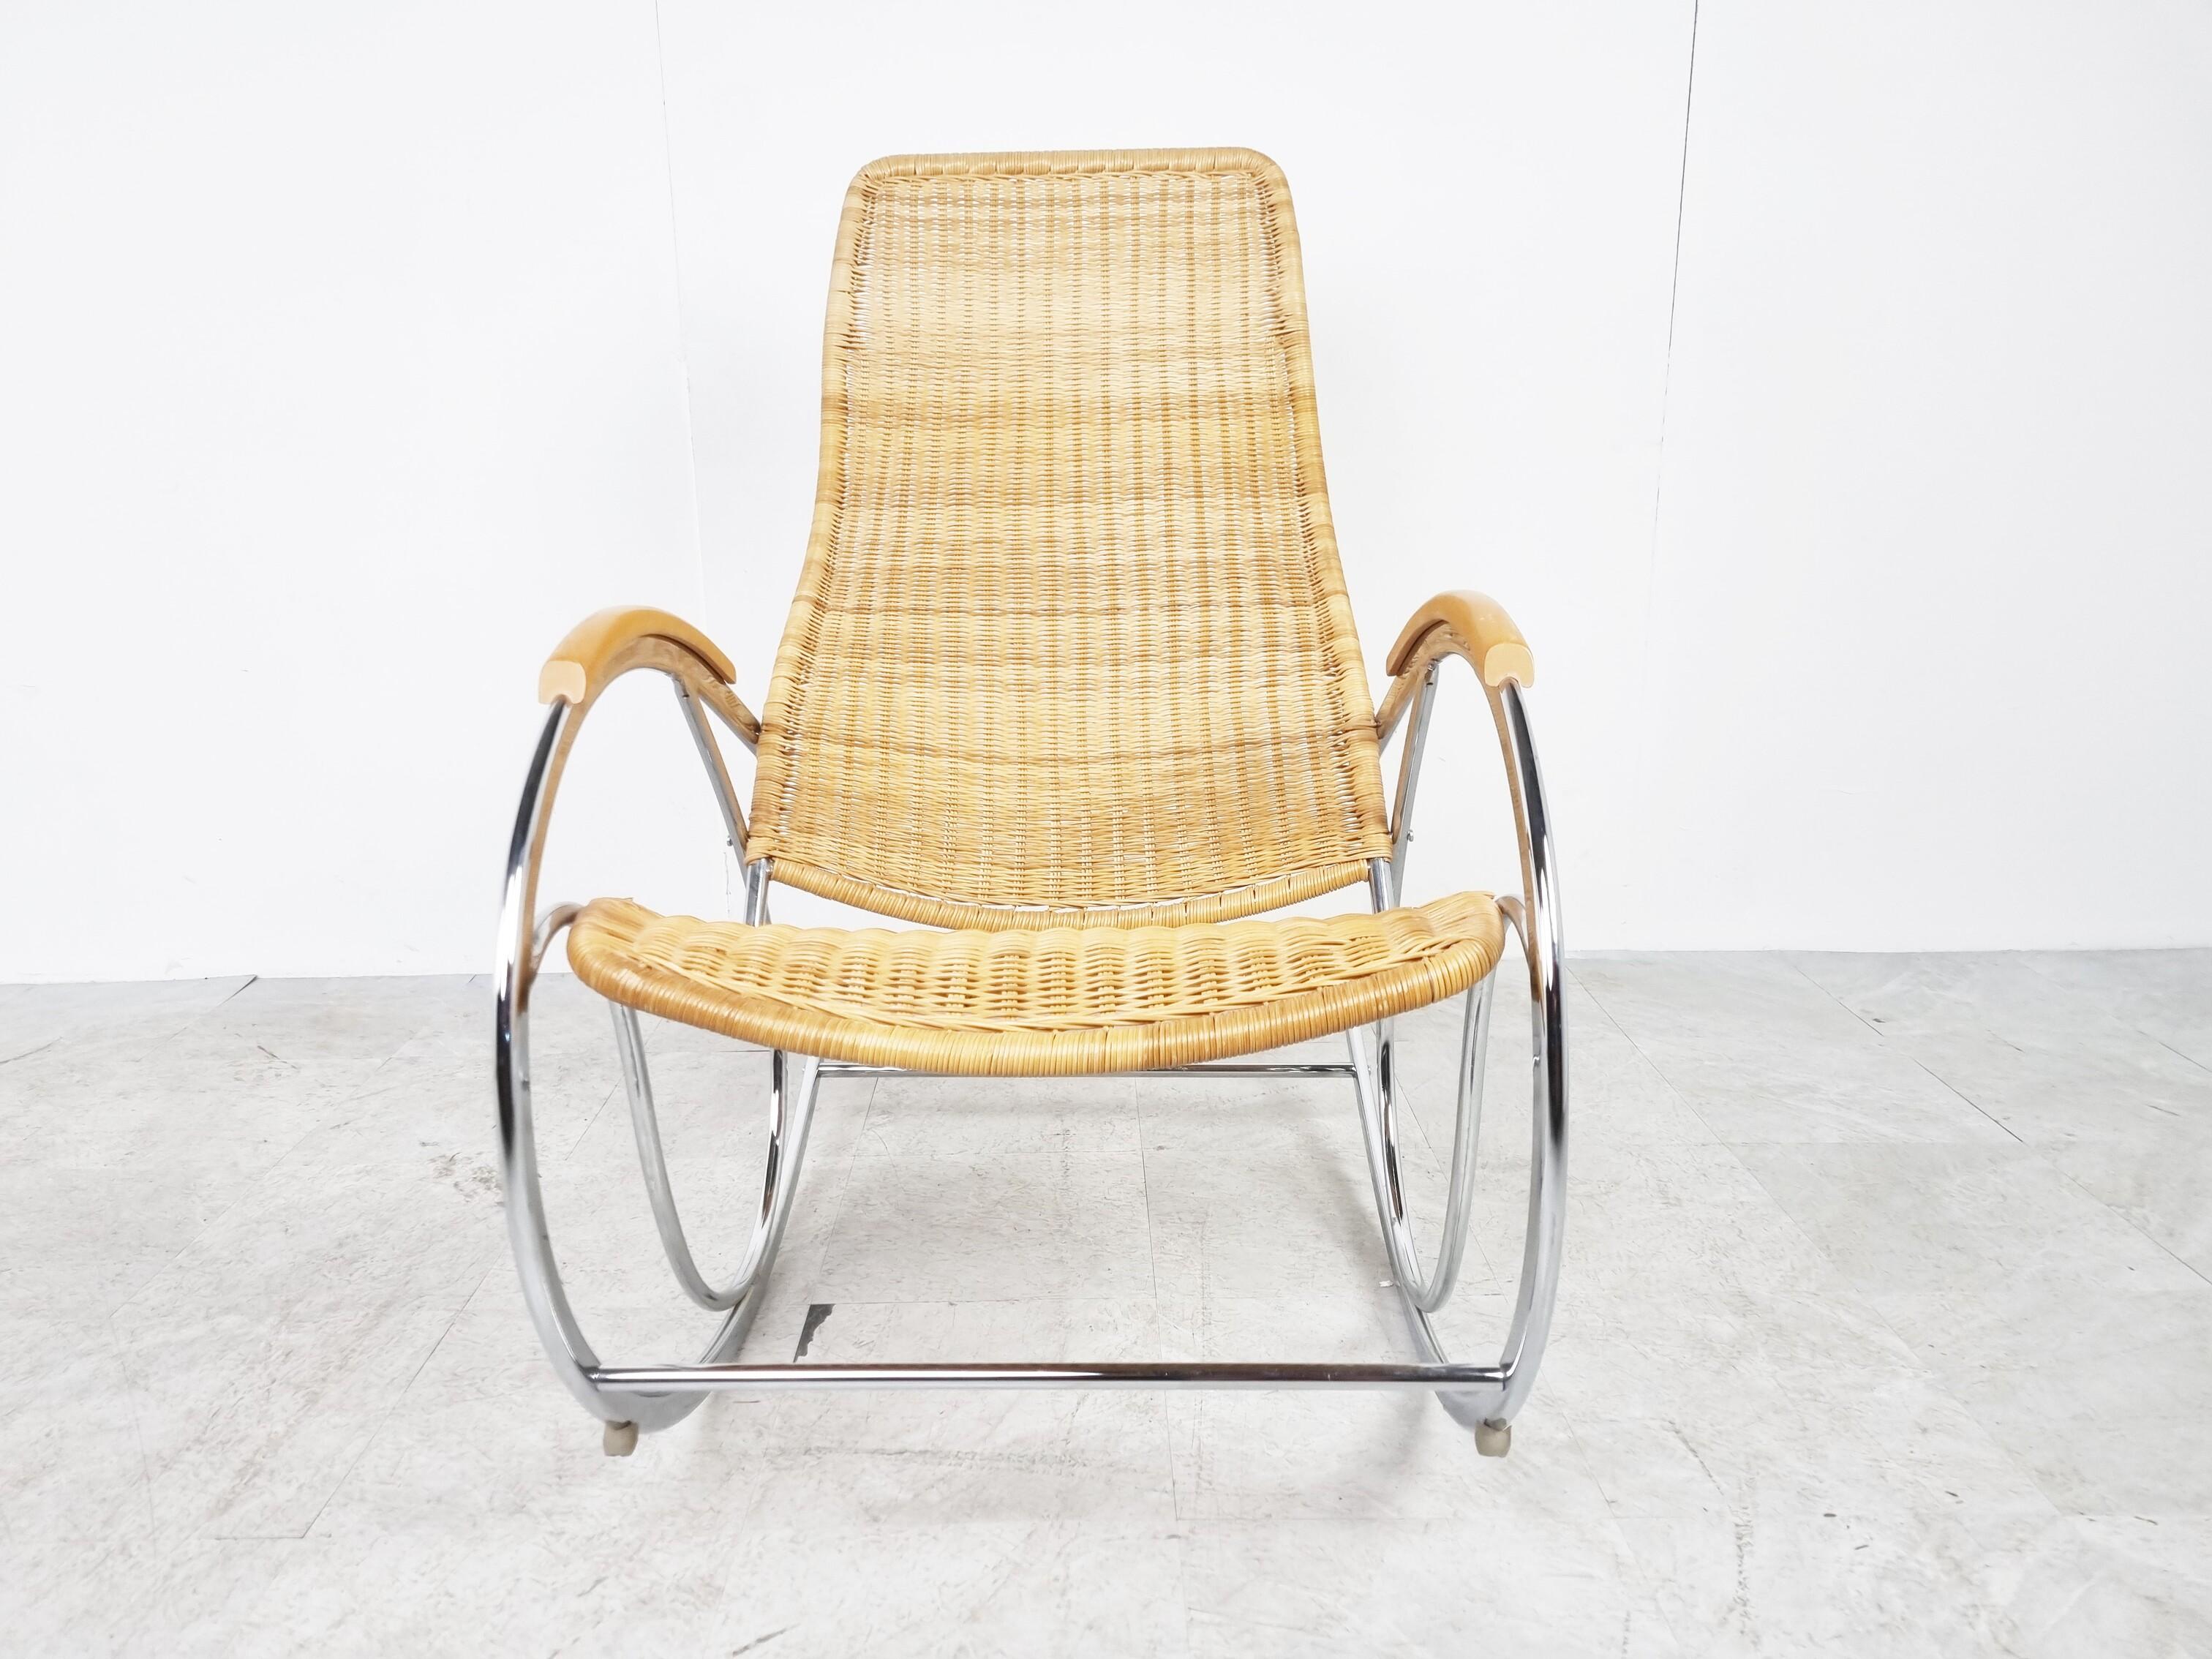 Late 20th Century Vintage Chrome and Wicker Rocking Chair, 1970s For Sale